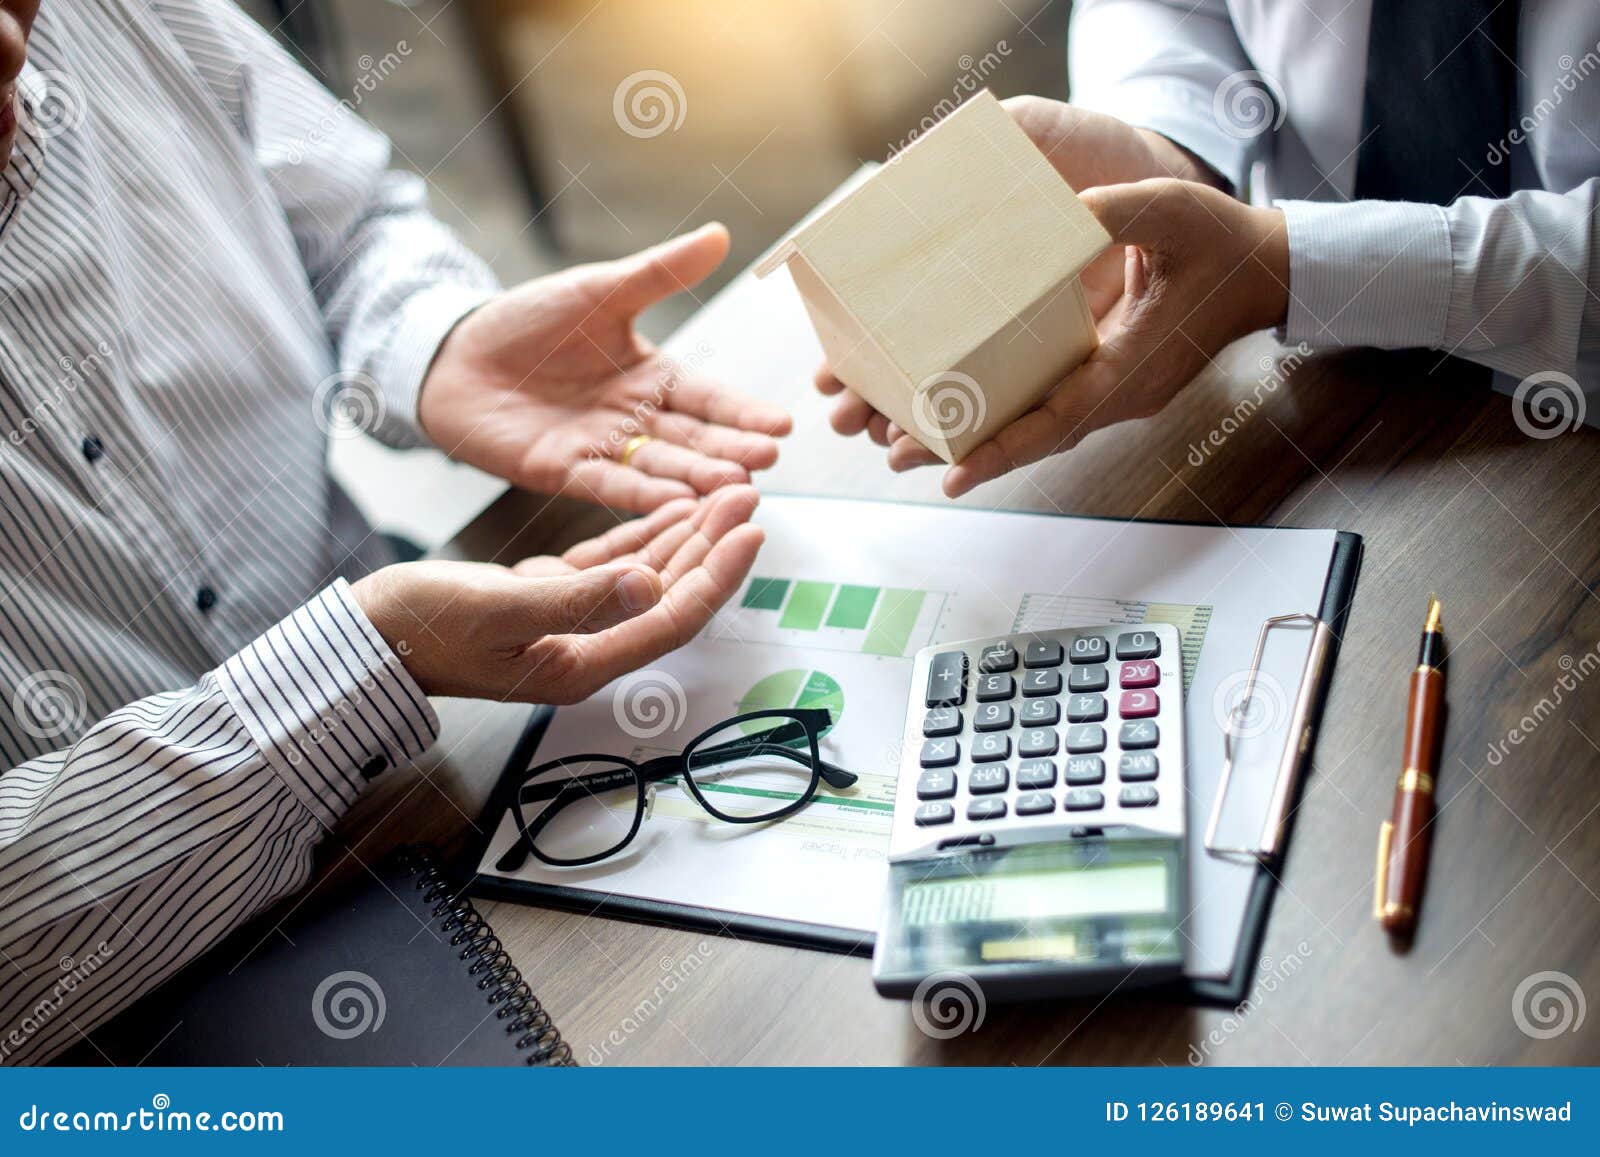 Loan Business Finace Read Report From Data Analysis Stock Image